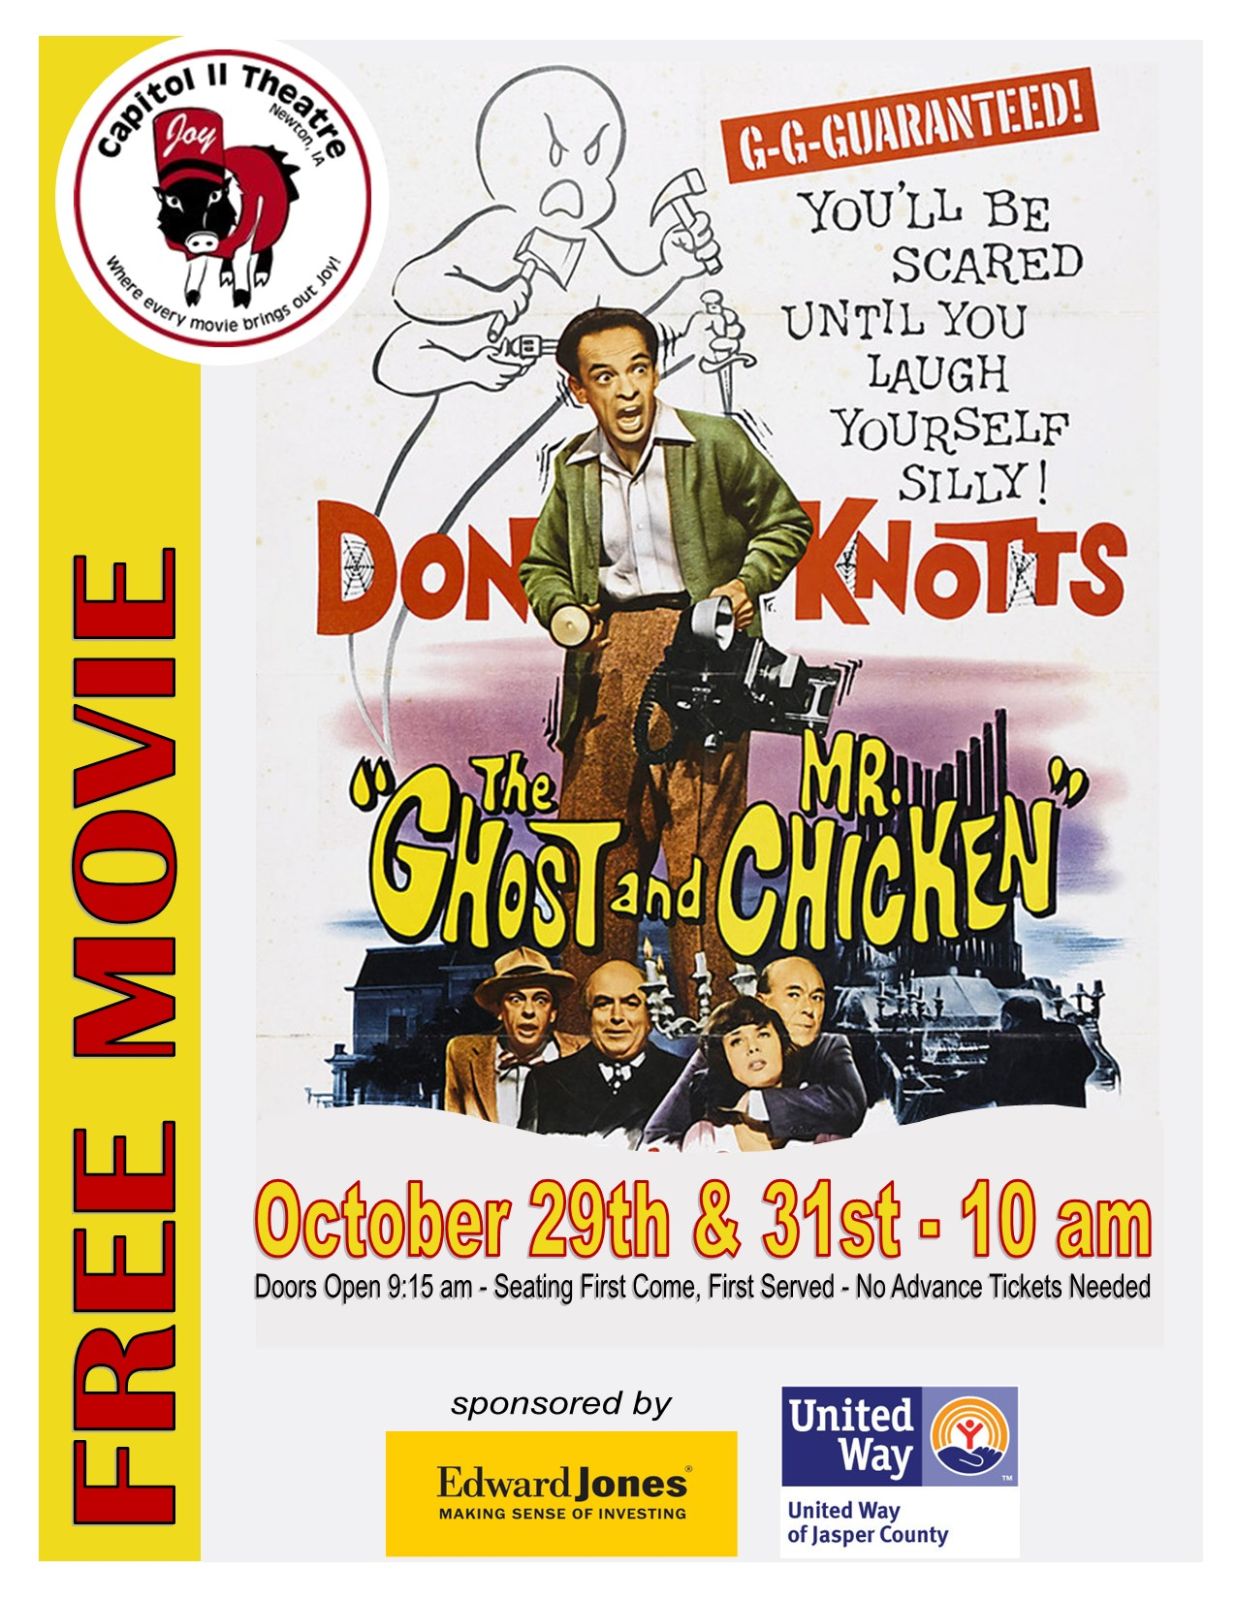 Event Promo Photo For Free Movie-The Ghost and Mr. Chicken